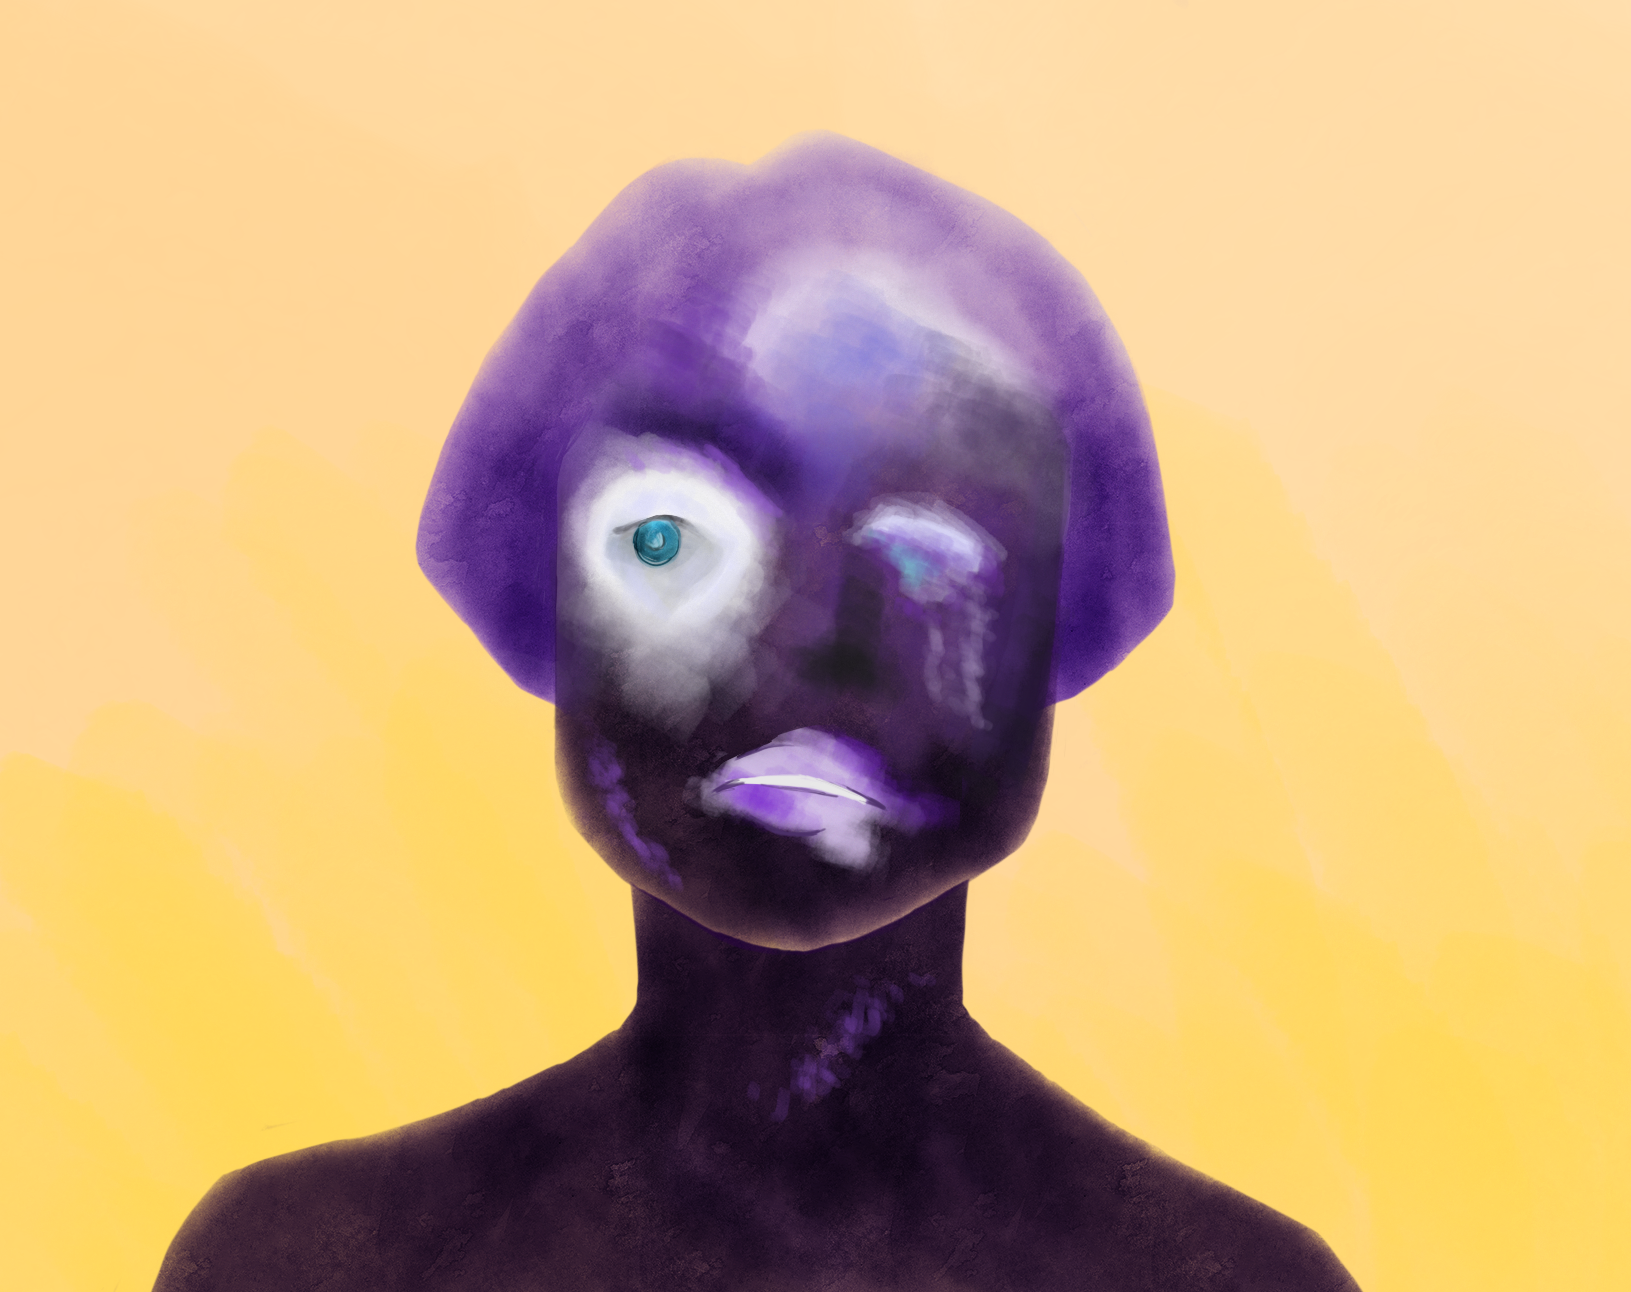 Impressionistic painting of a purple woman with one eye